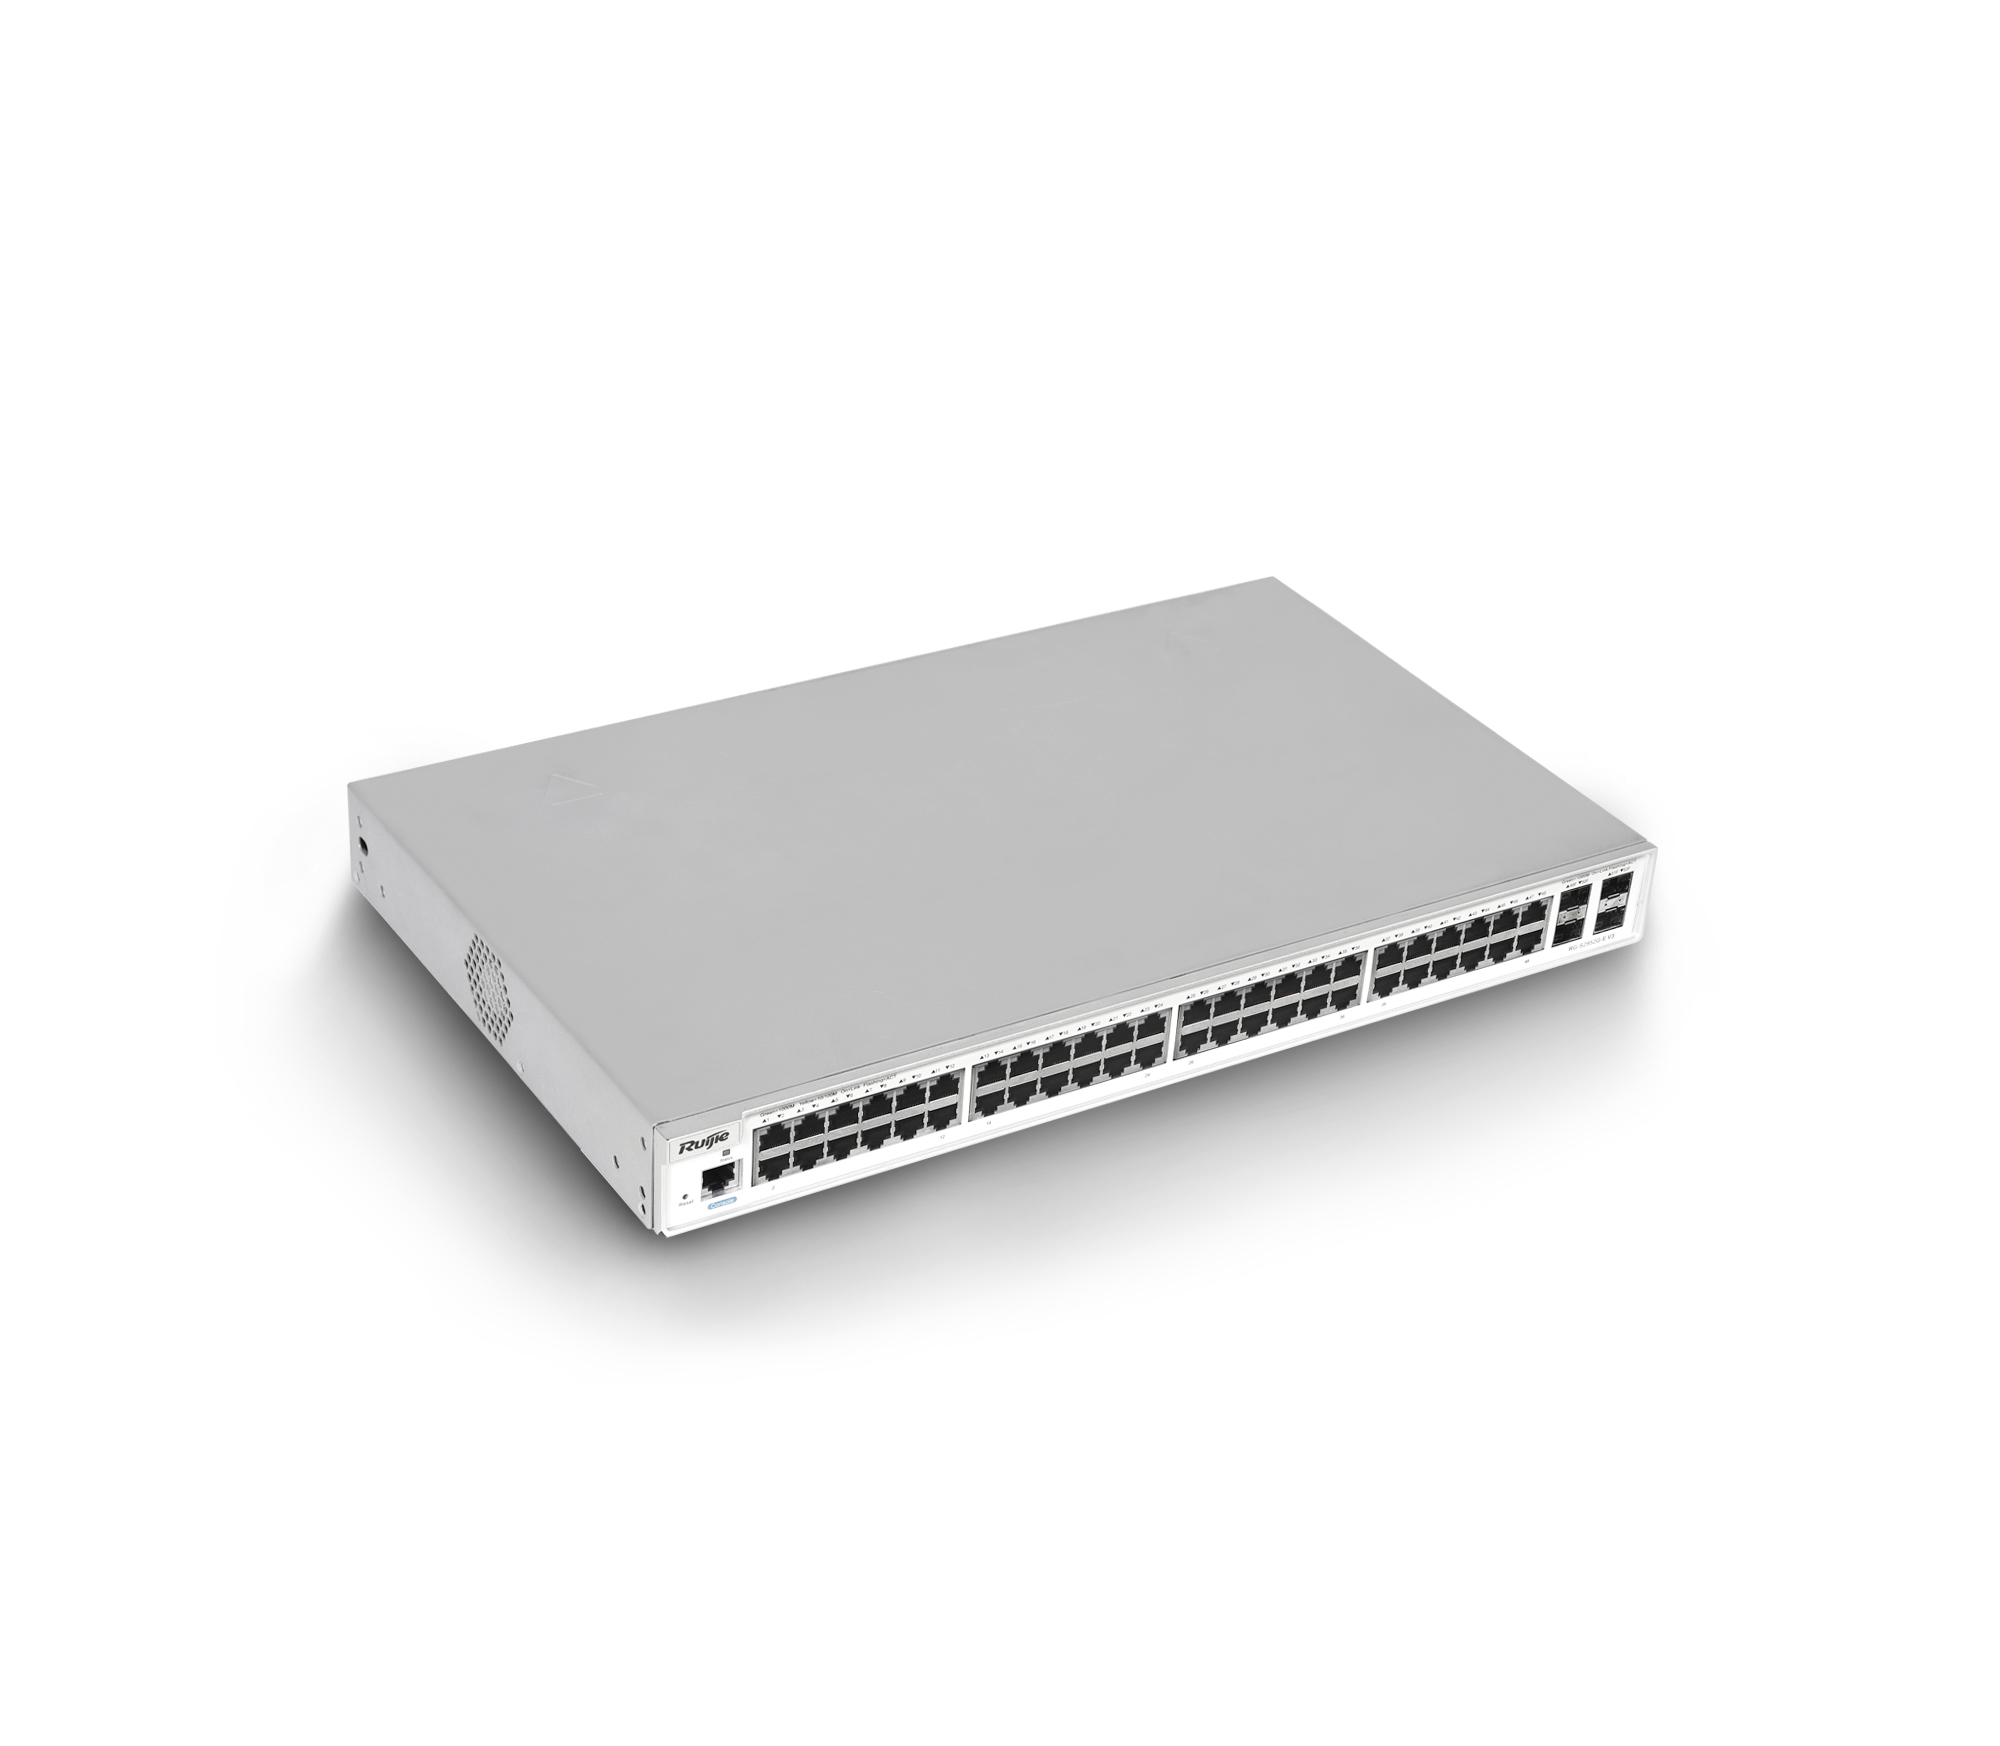 Ruijie RG-S2952G-E Ethernet Switch, 48-Port 10/100/1000Basse-T And 4GE SFP Prots AC-RG-S2952G-E V3